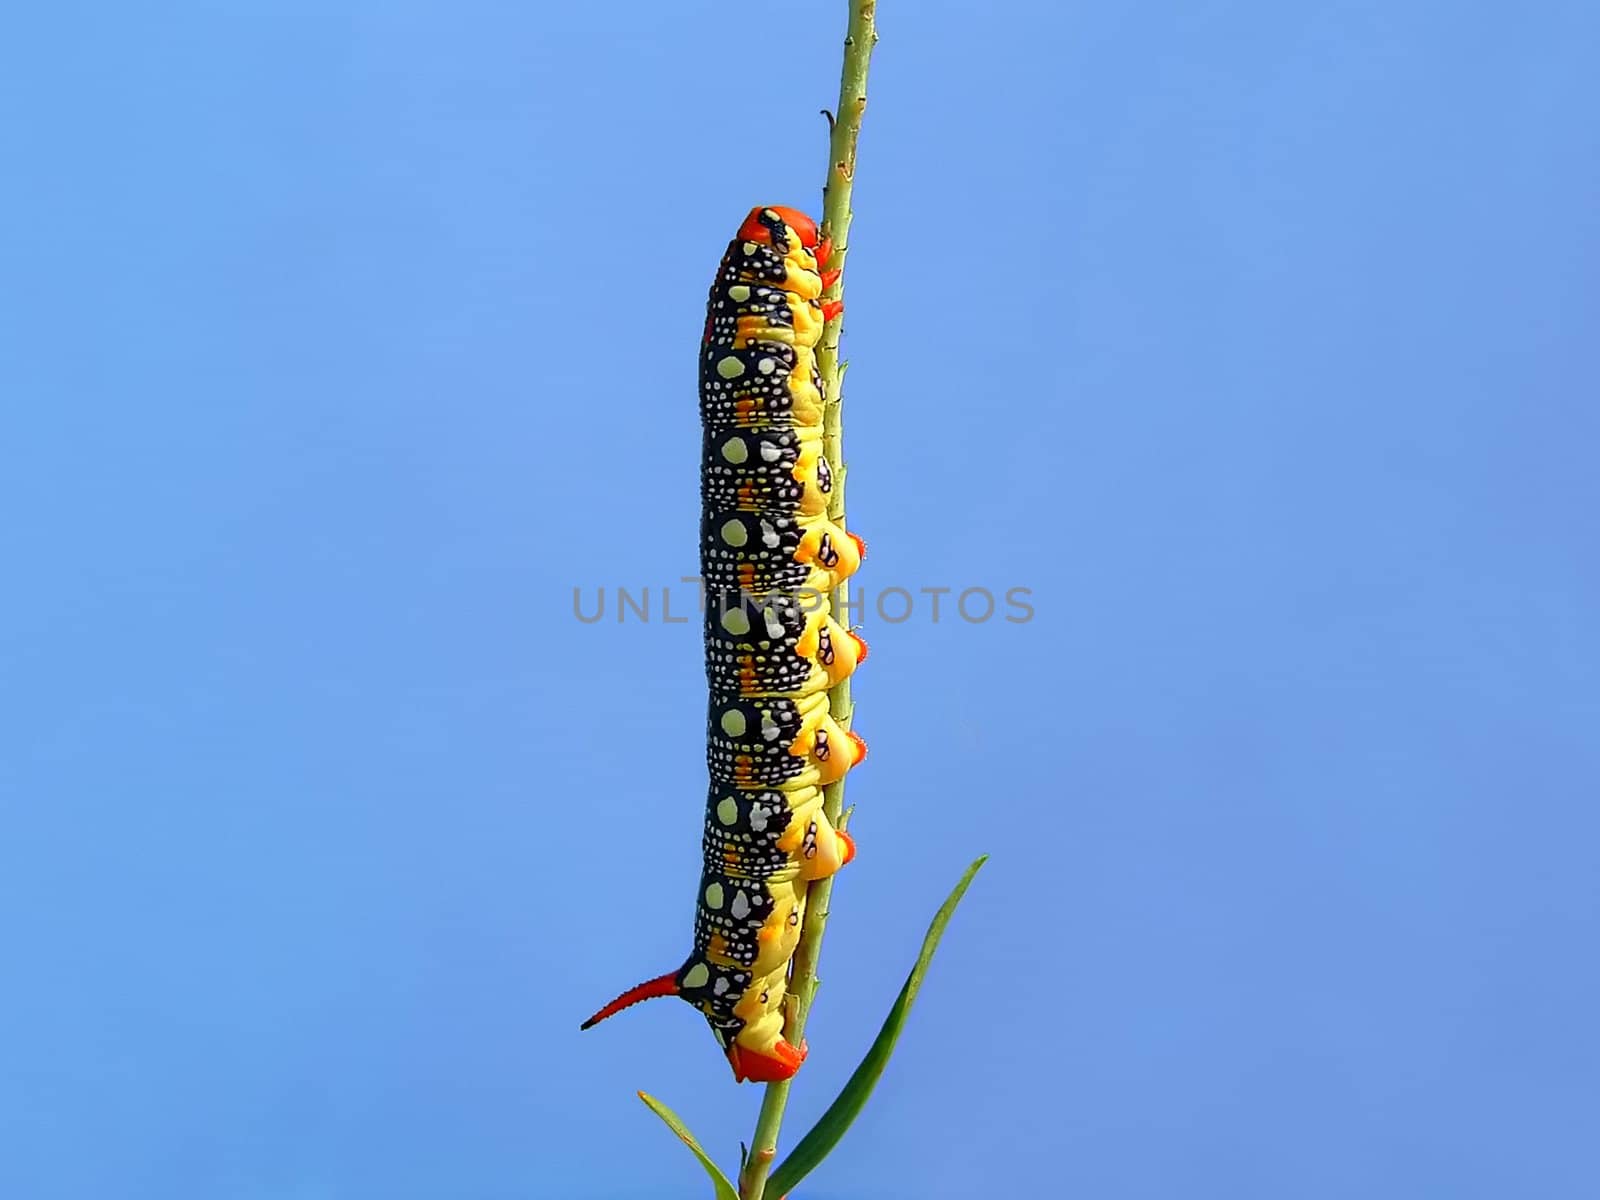 The motley caterpillar has breakfast a juicy stalk on a background of the blue sky